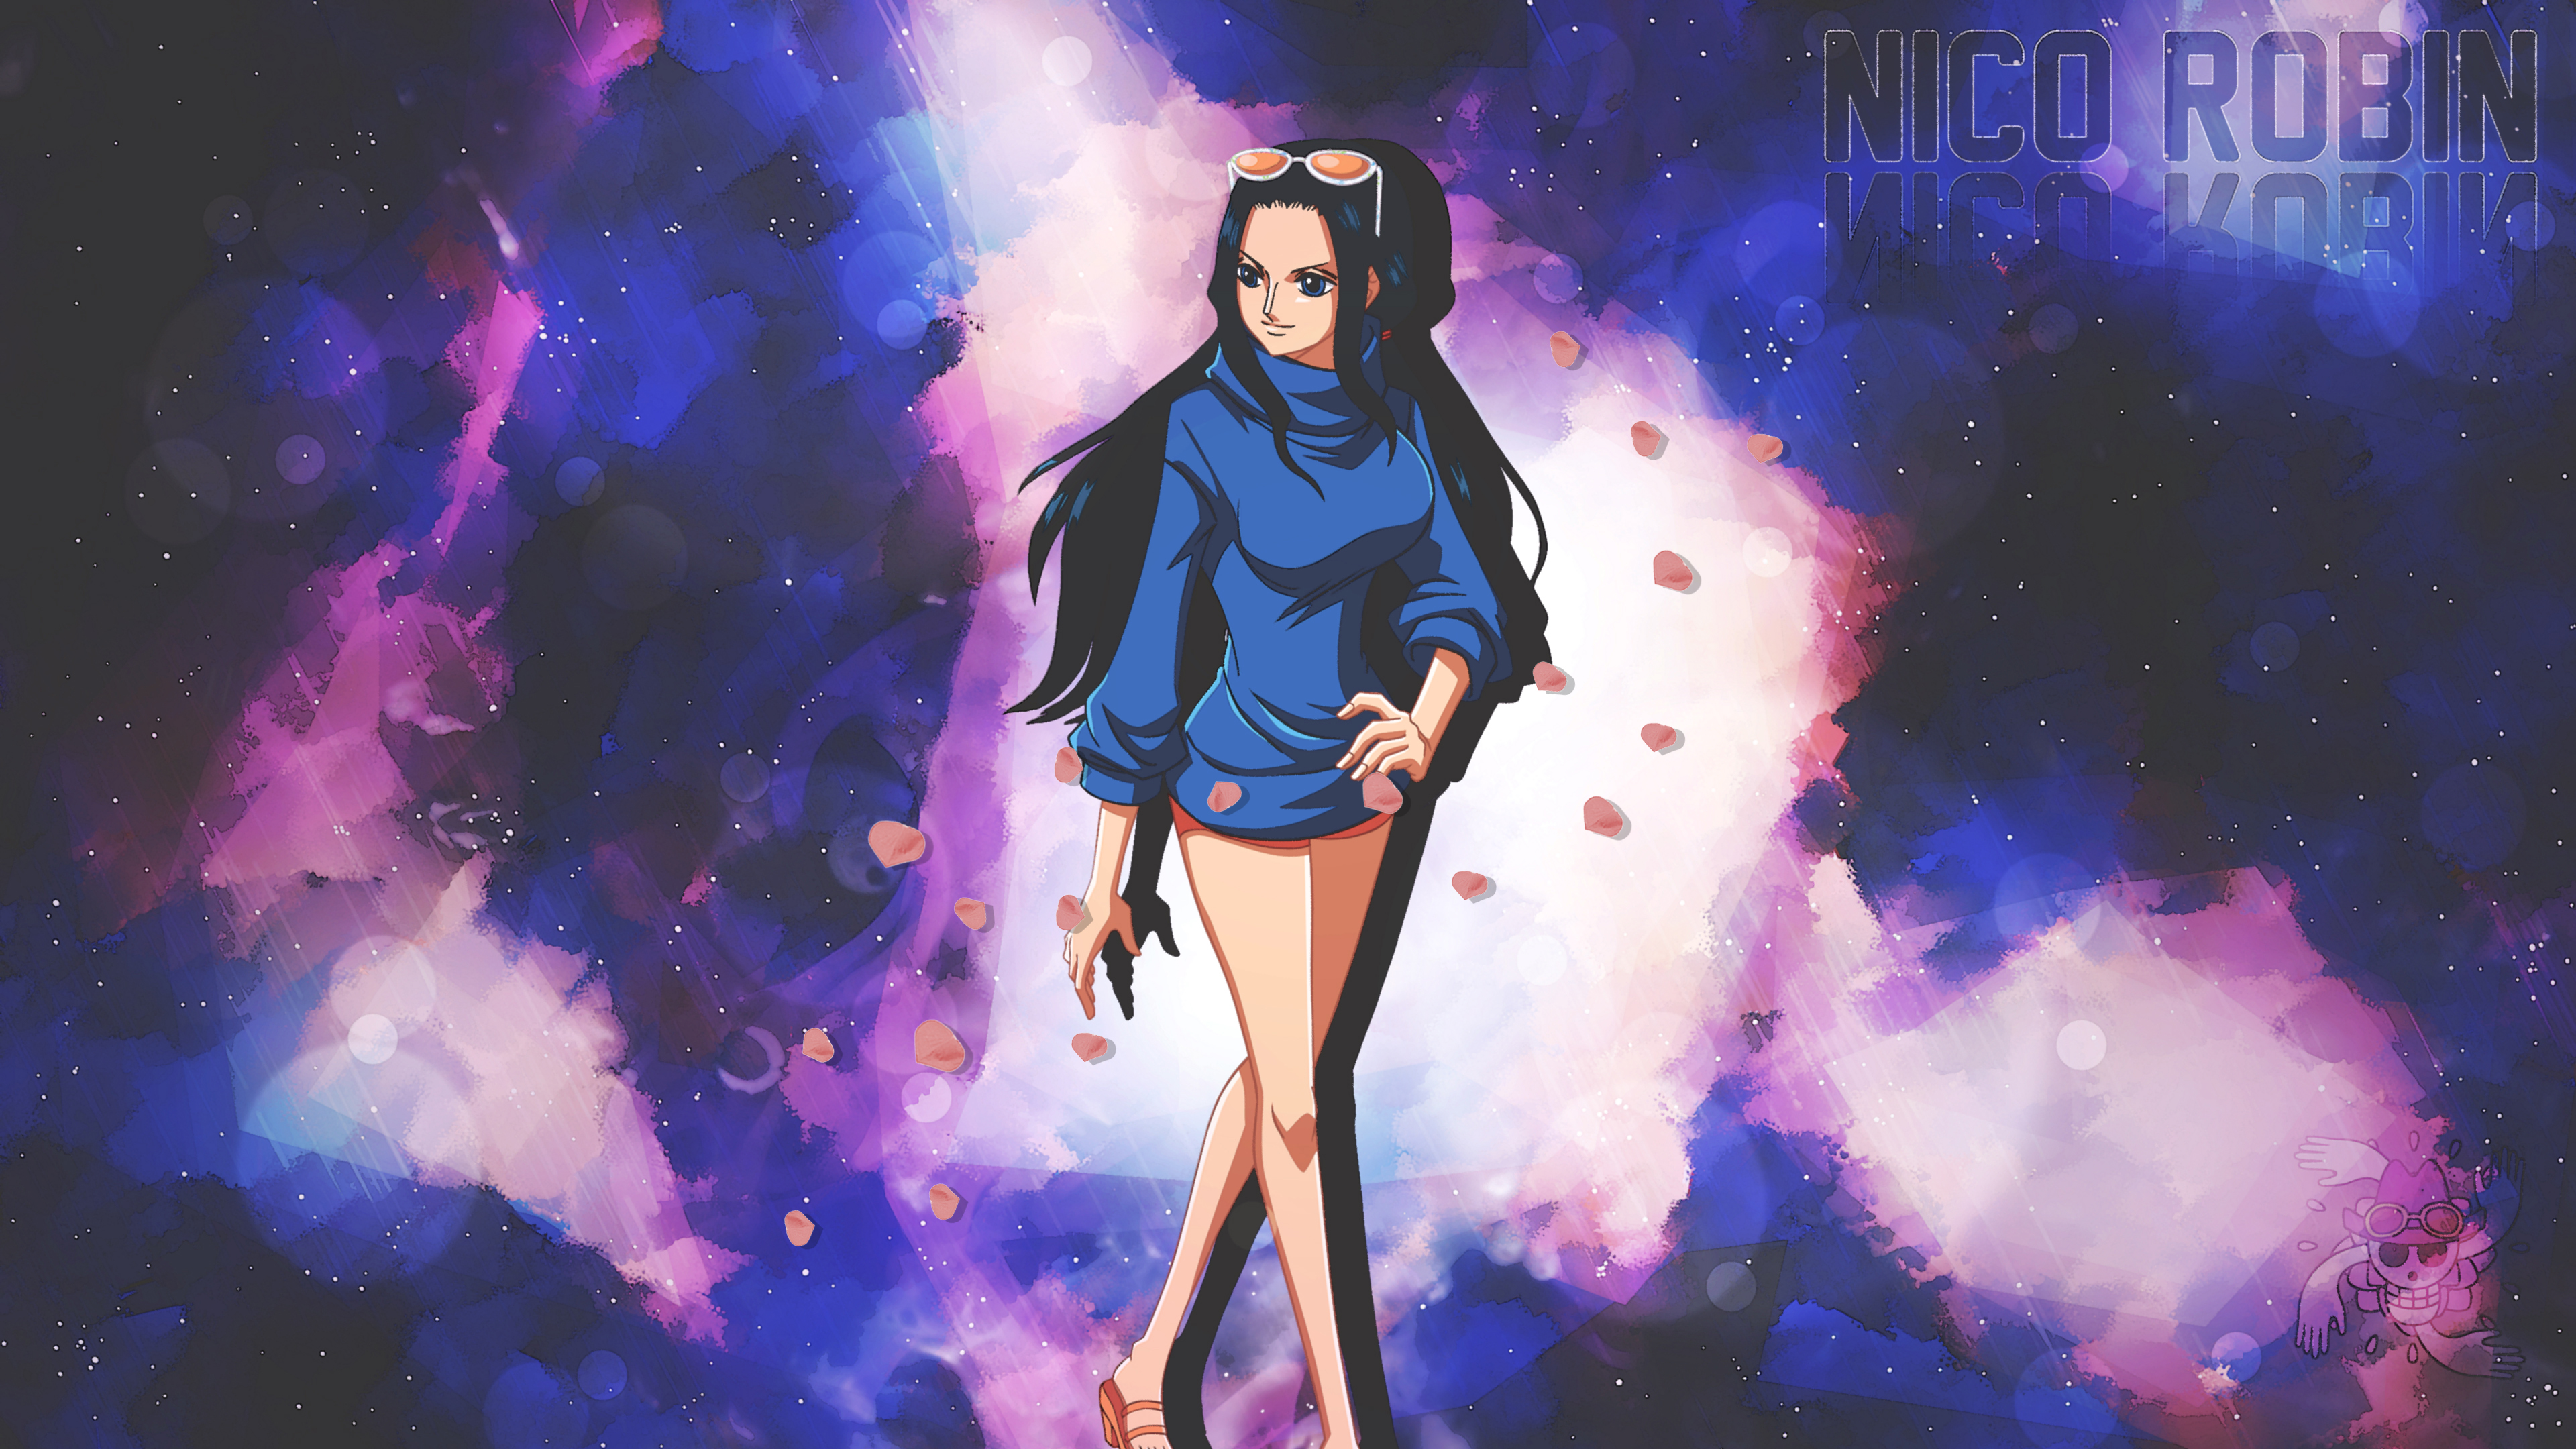 4K Nico Robin Wallpaper and Background Image